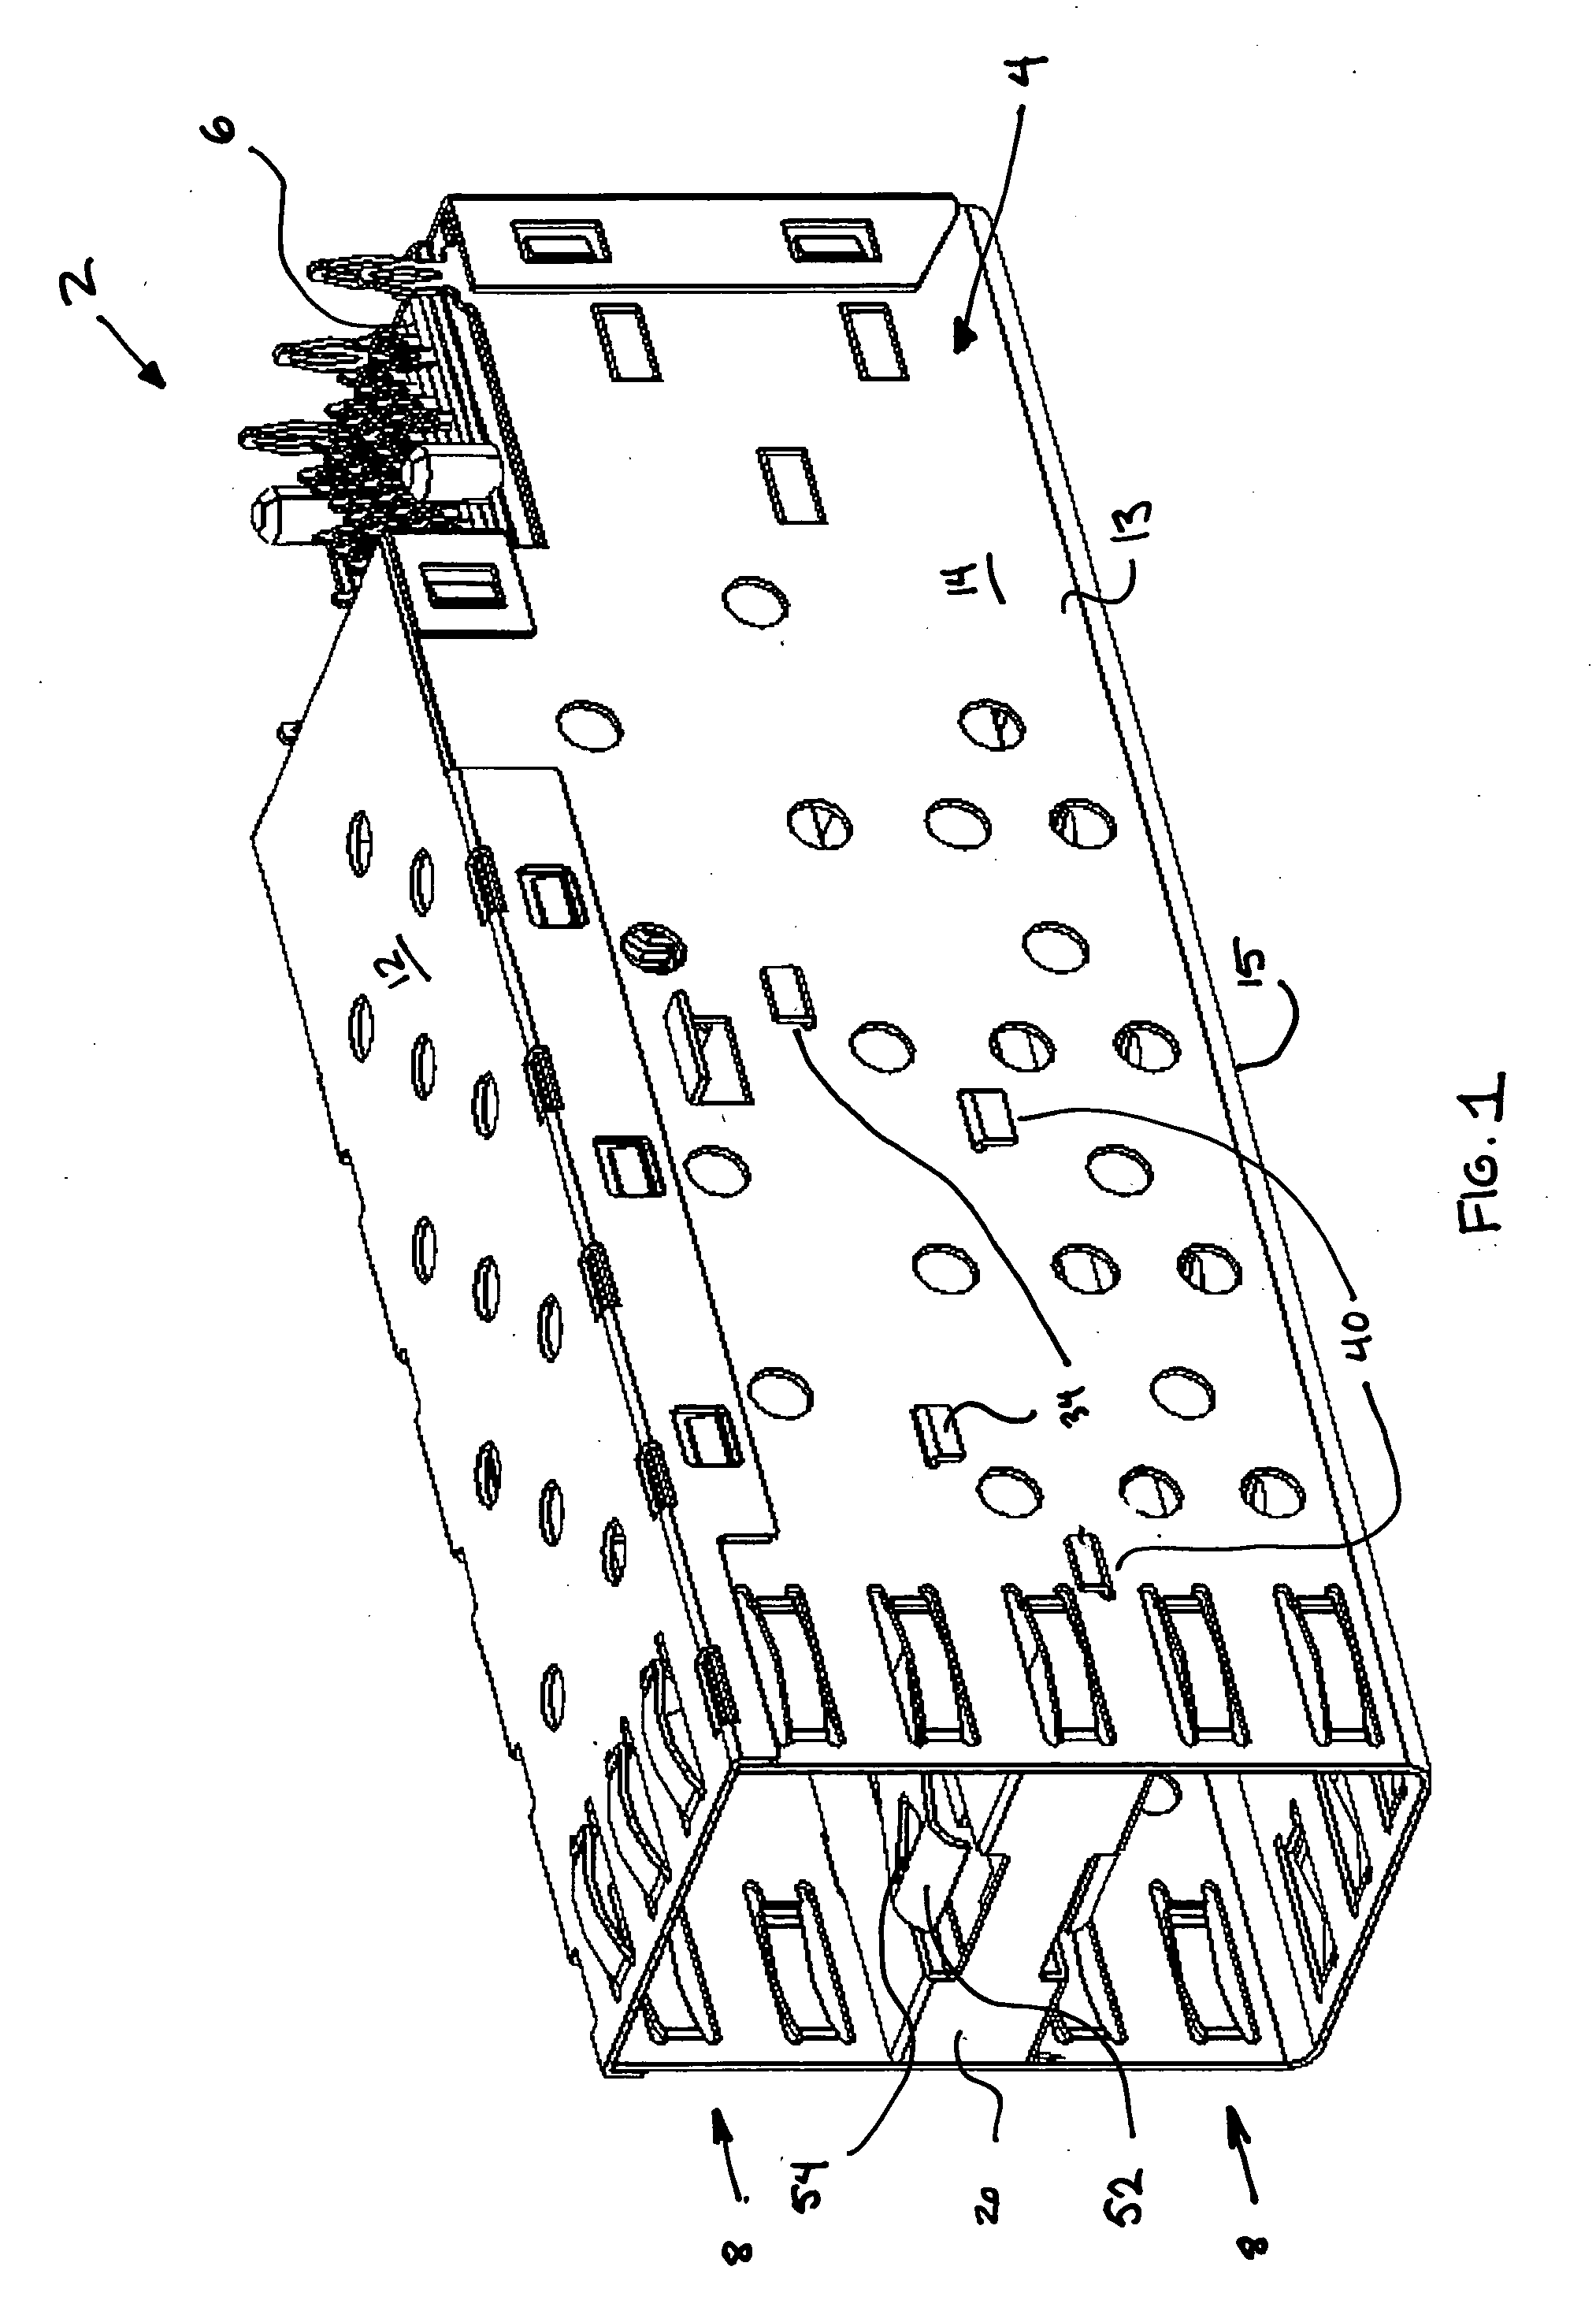 Low-profile connector assembly and methods